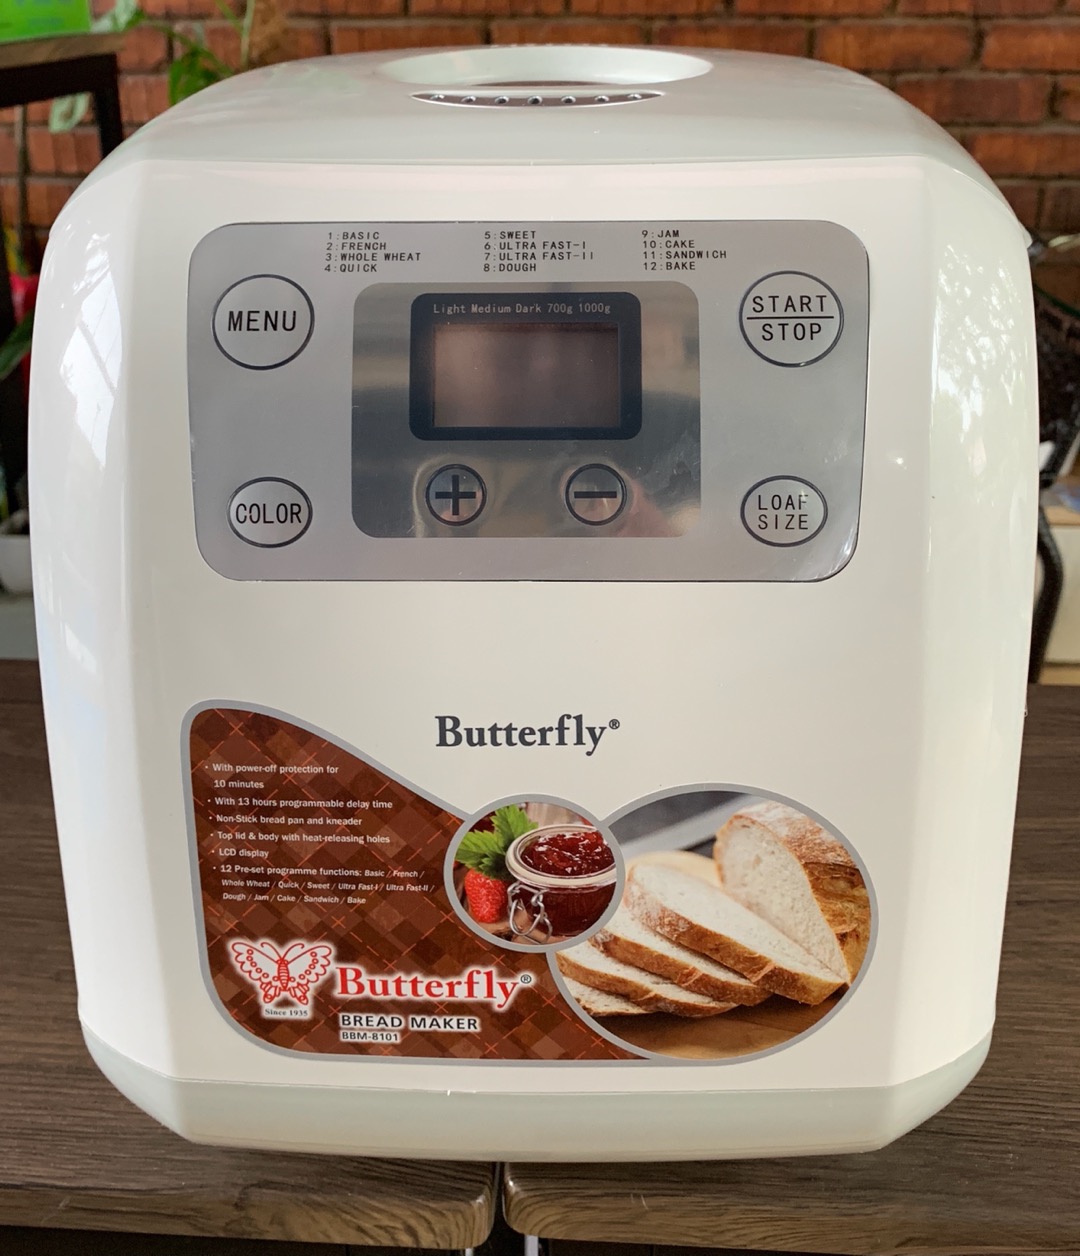 Butterfly 2l Bread Maker m 8101 Similar Product To Russell Taylors Bm 10 Shopee Malaysia